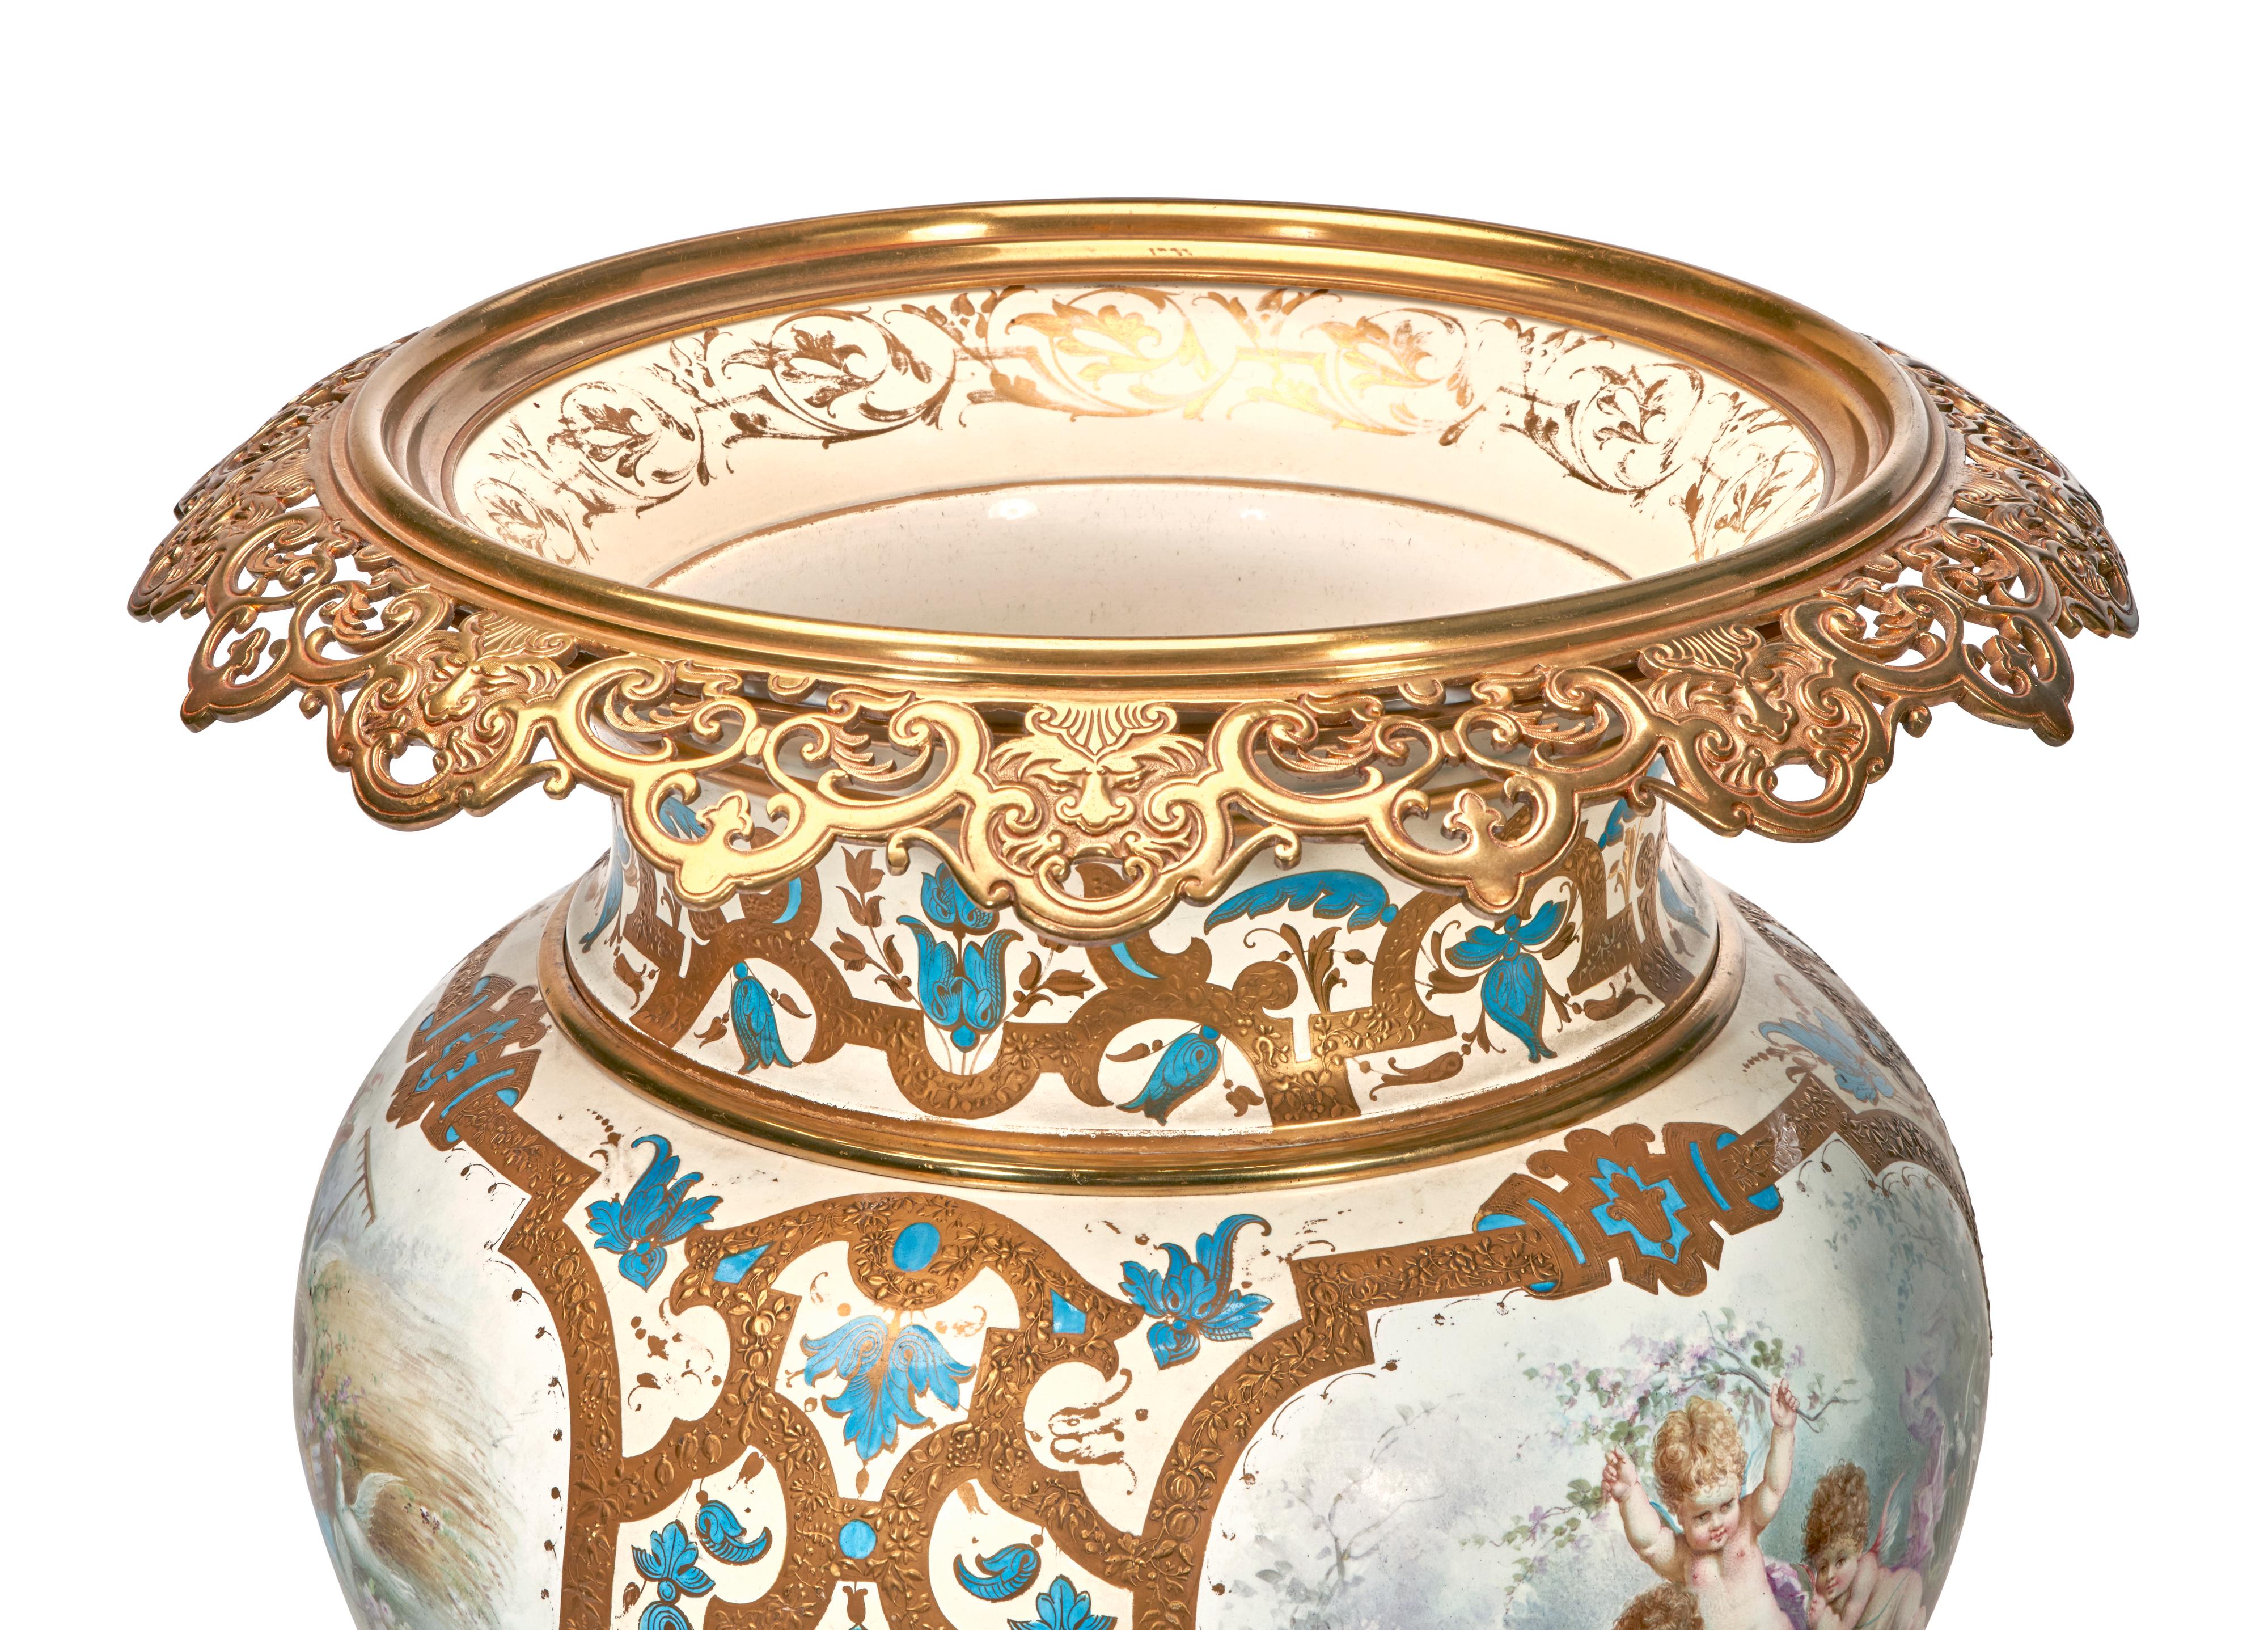 Large & Important French 19th C. Sevres Porcelain Ormolu Mounted Jardiniere In Good Condition For Sale In New York, NY